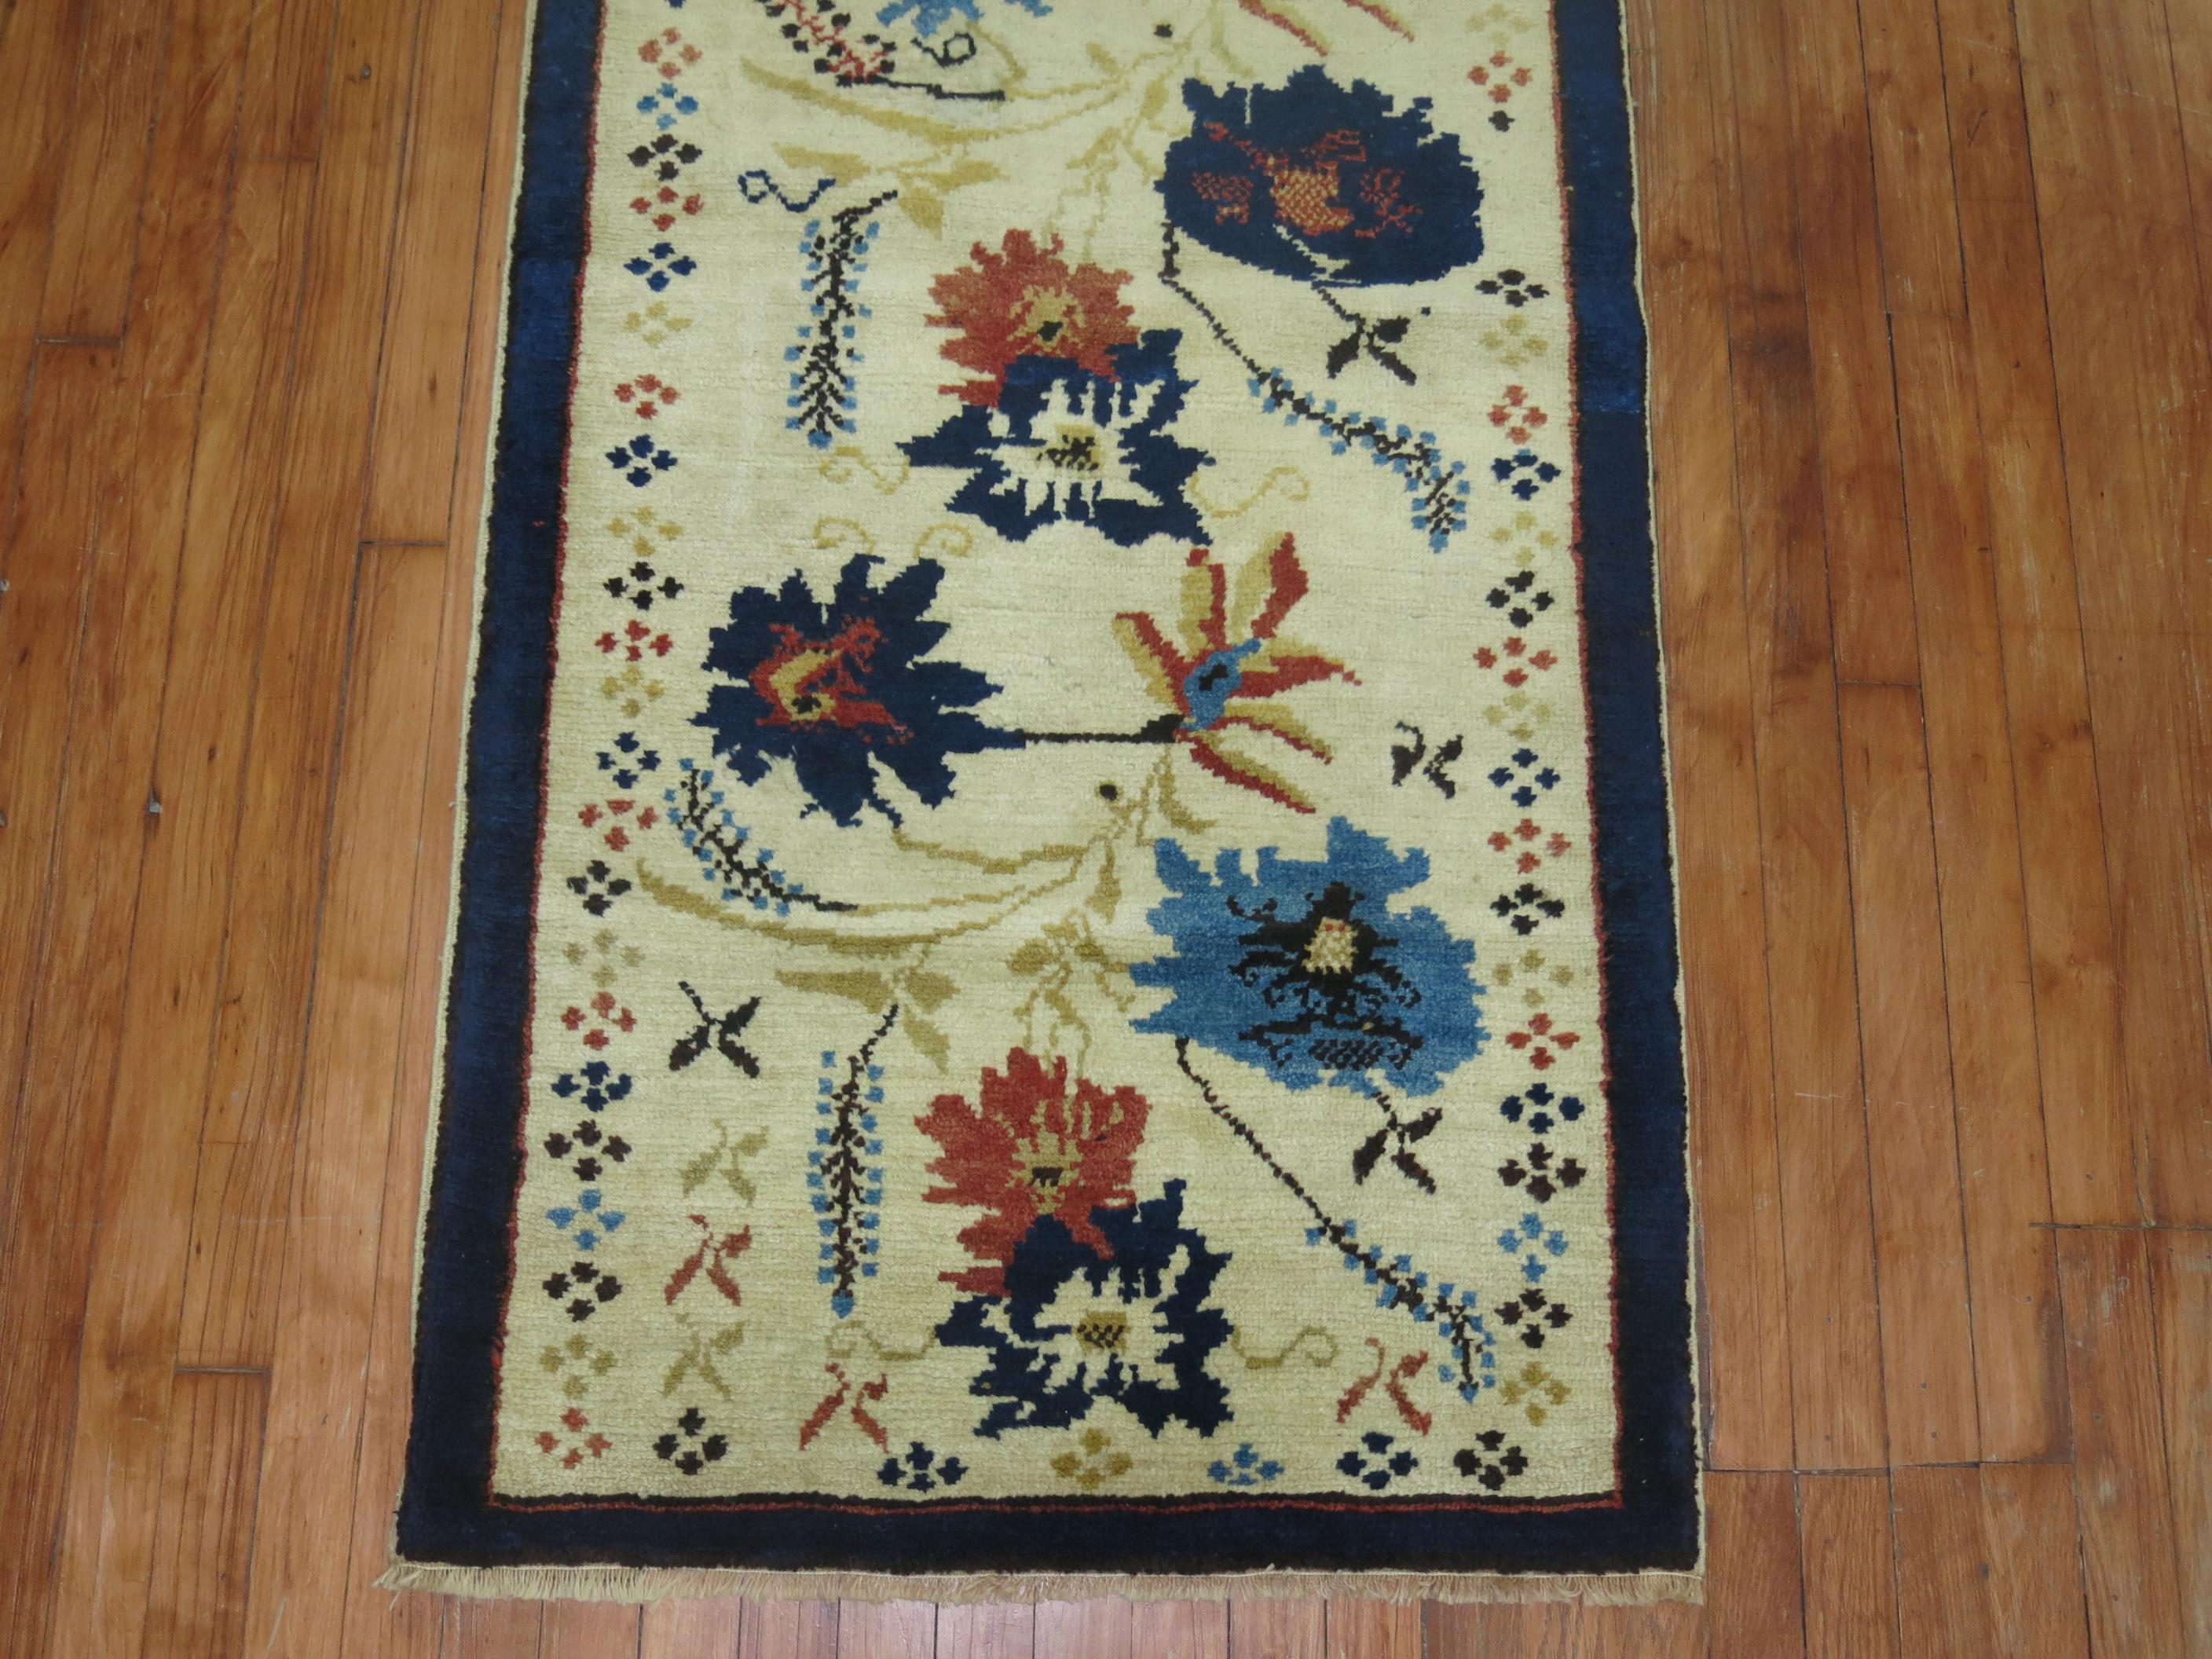 Hand-Knotted Elegant Ivory Blue Color Mid-20th Century Turkish Flower Motif Wool Runner